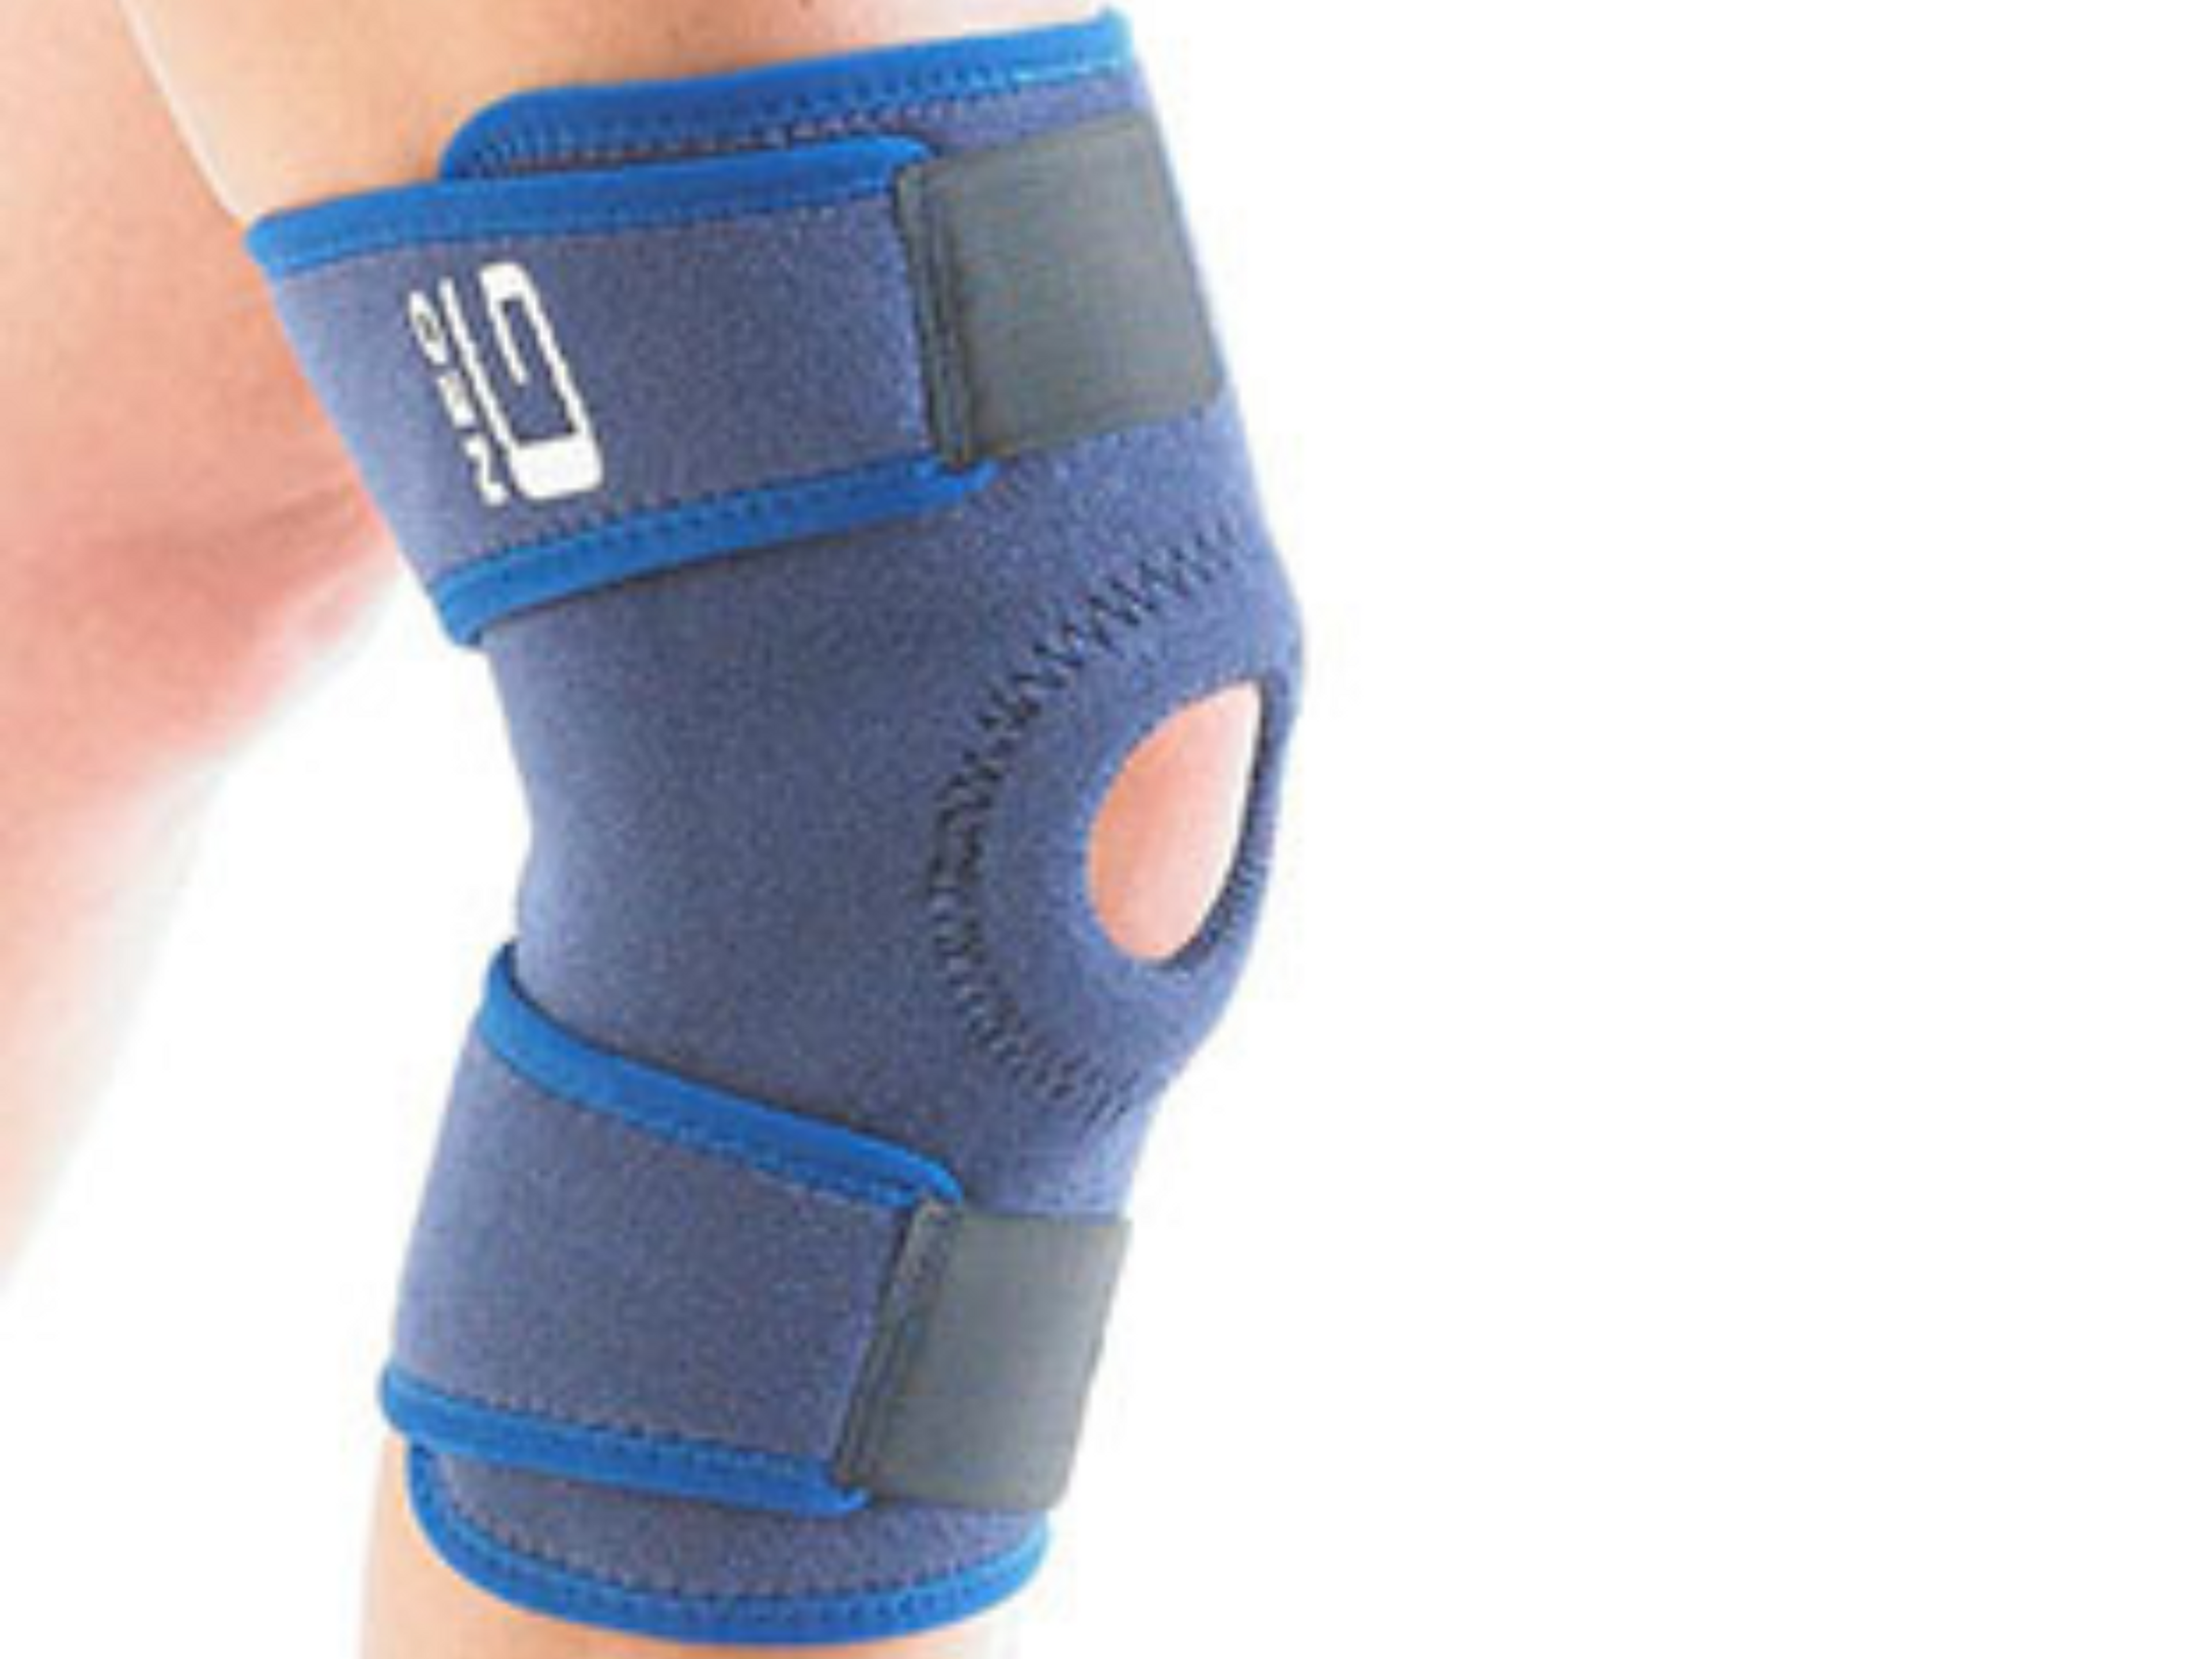 Soft knee braces without hinges are only appropriate for minor meniscus tears.